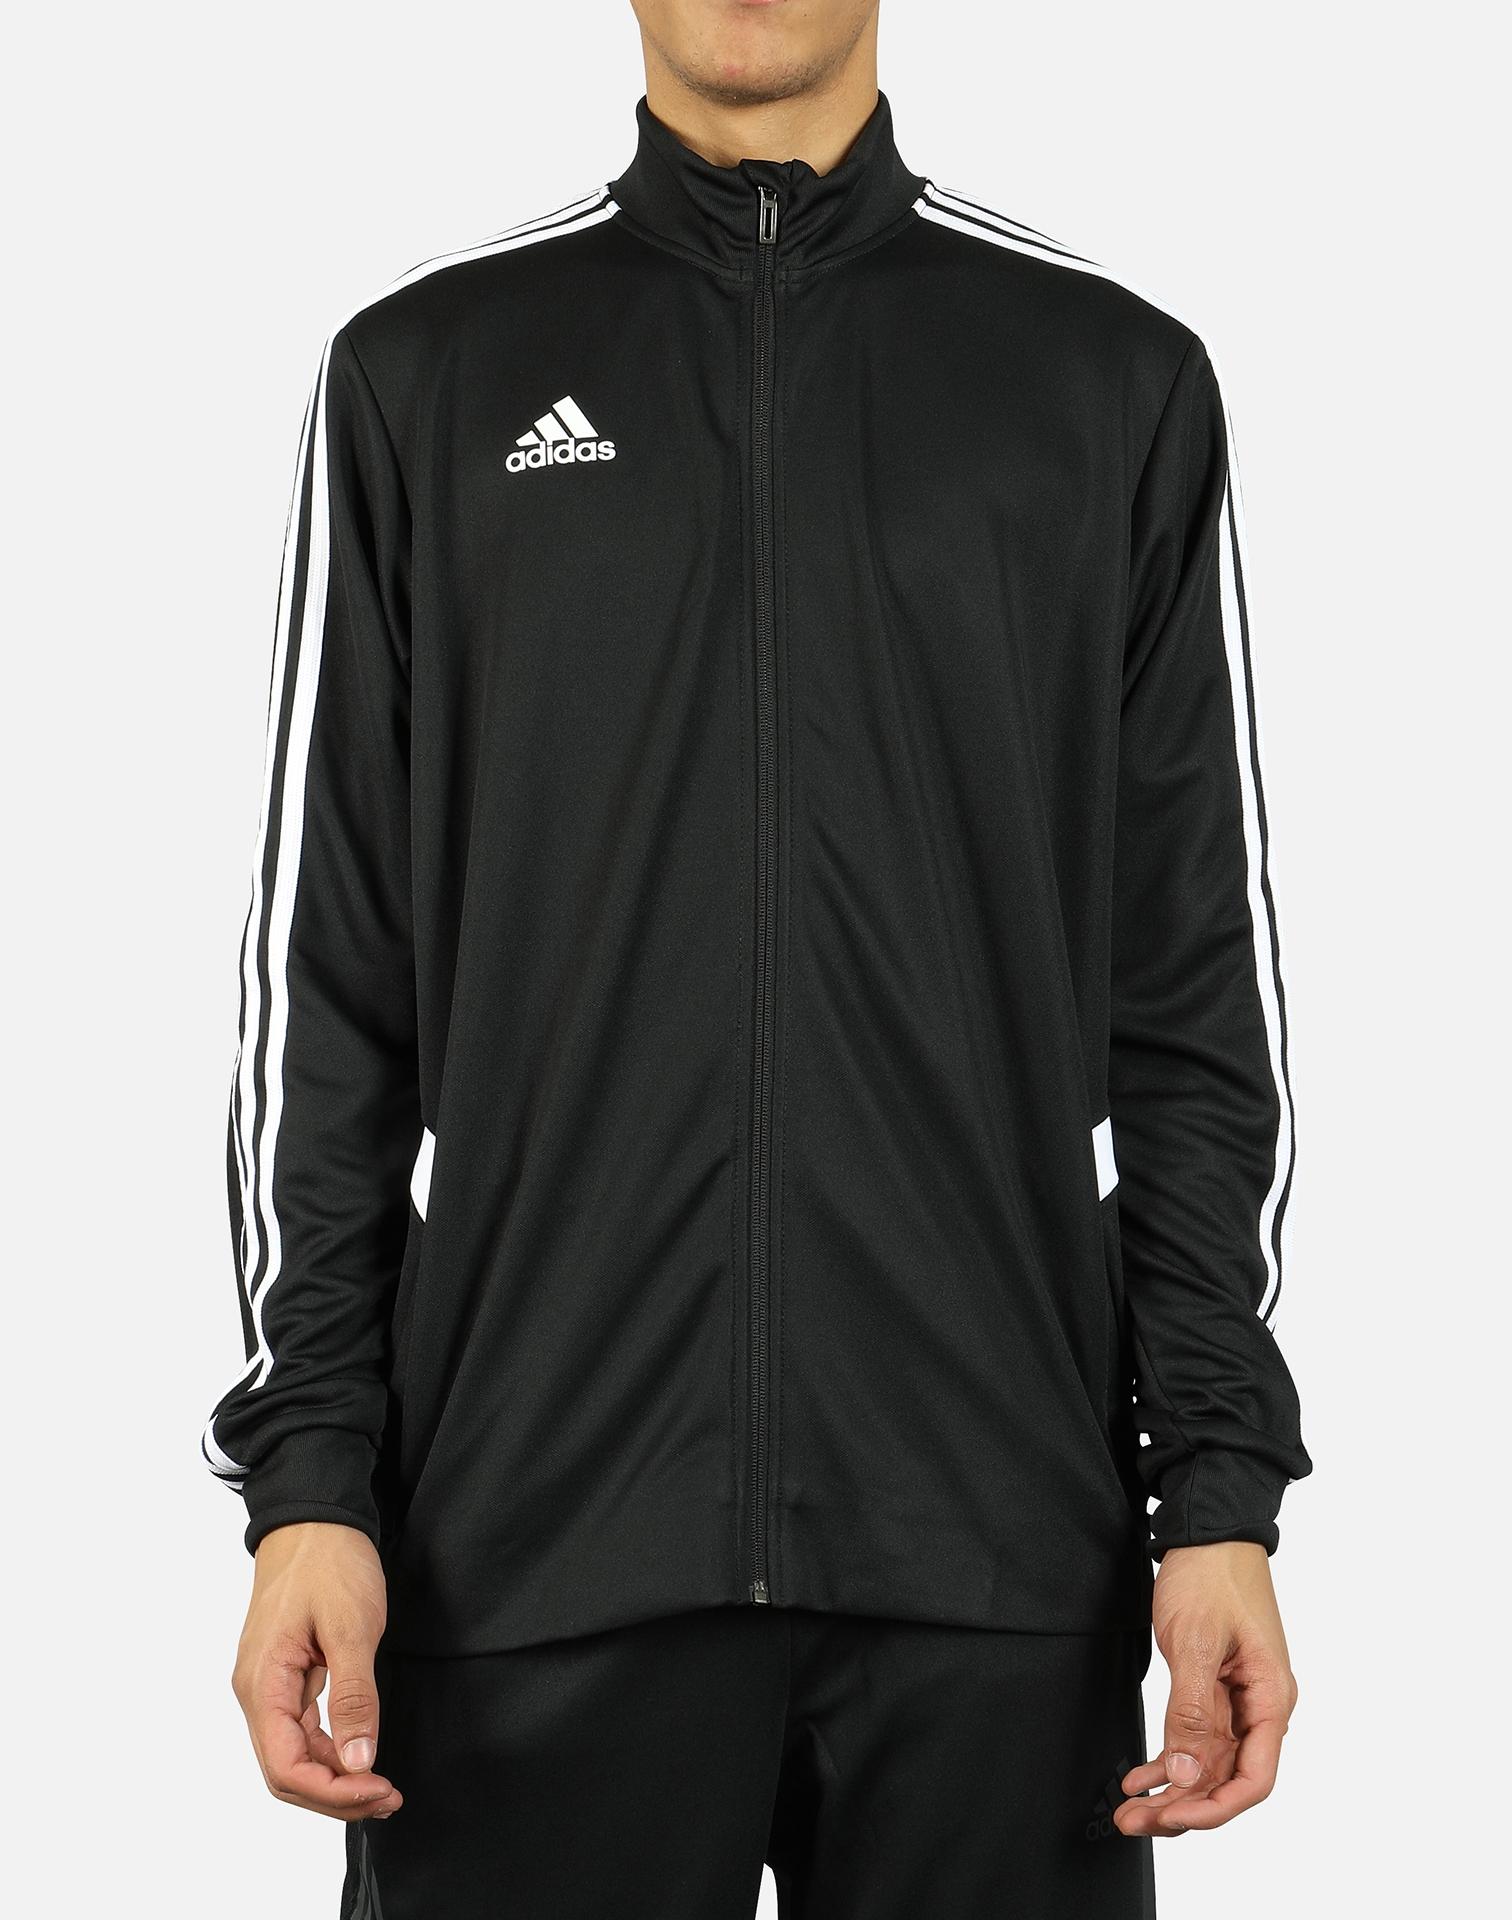 adidas Synthetic Tiro Track Jacket in Black for Men - Lyst